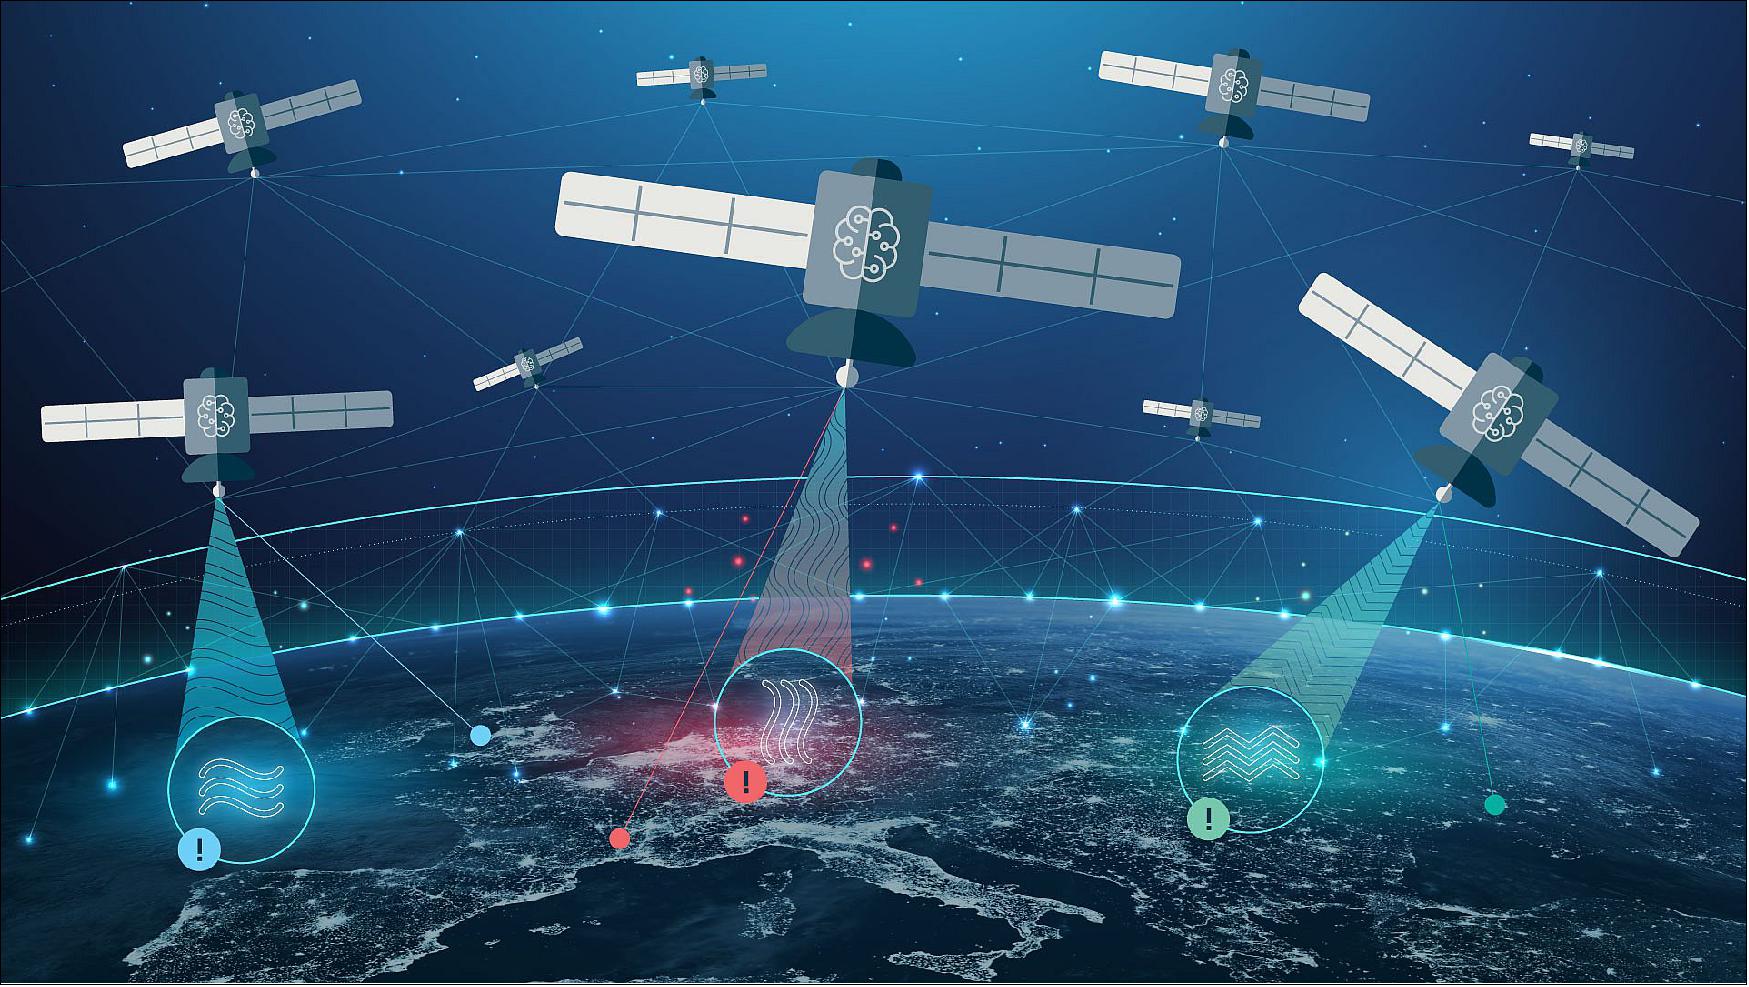 Figure 2: Intelligent interconnectivity in space empowers rapid, resilient responses to crises on Earth (image credit: ESA)